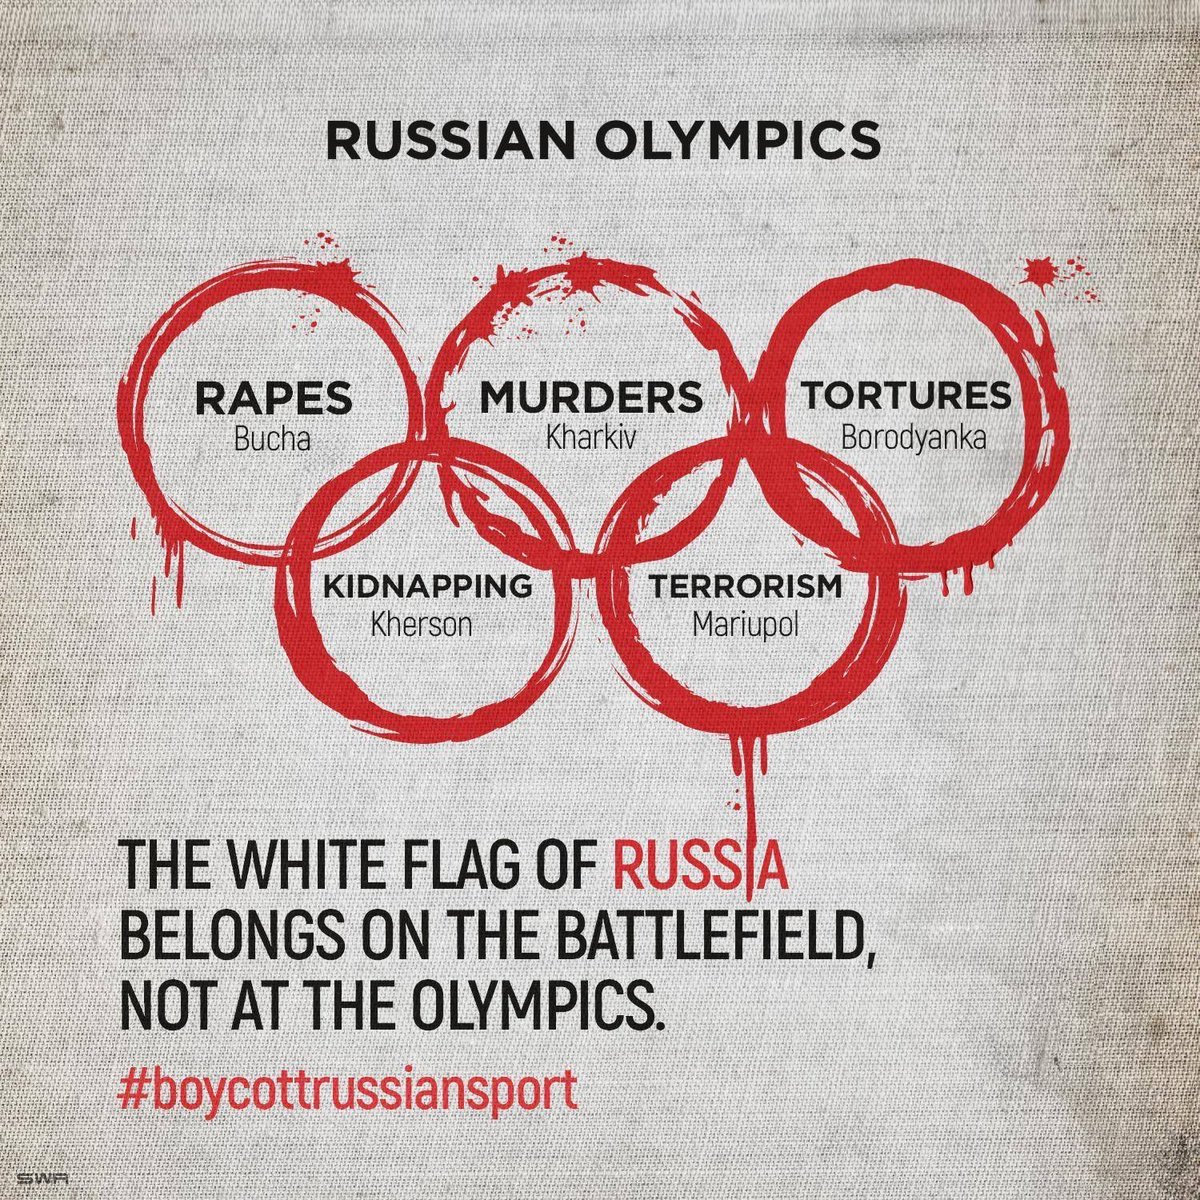 @iocmedia Countries & People Against Genocide will #boycottParisOlympics If IOC allows ANY Russians.